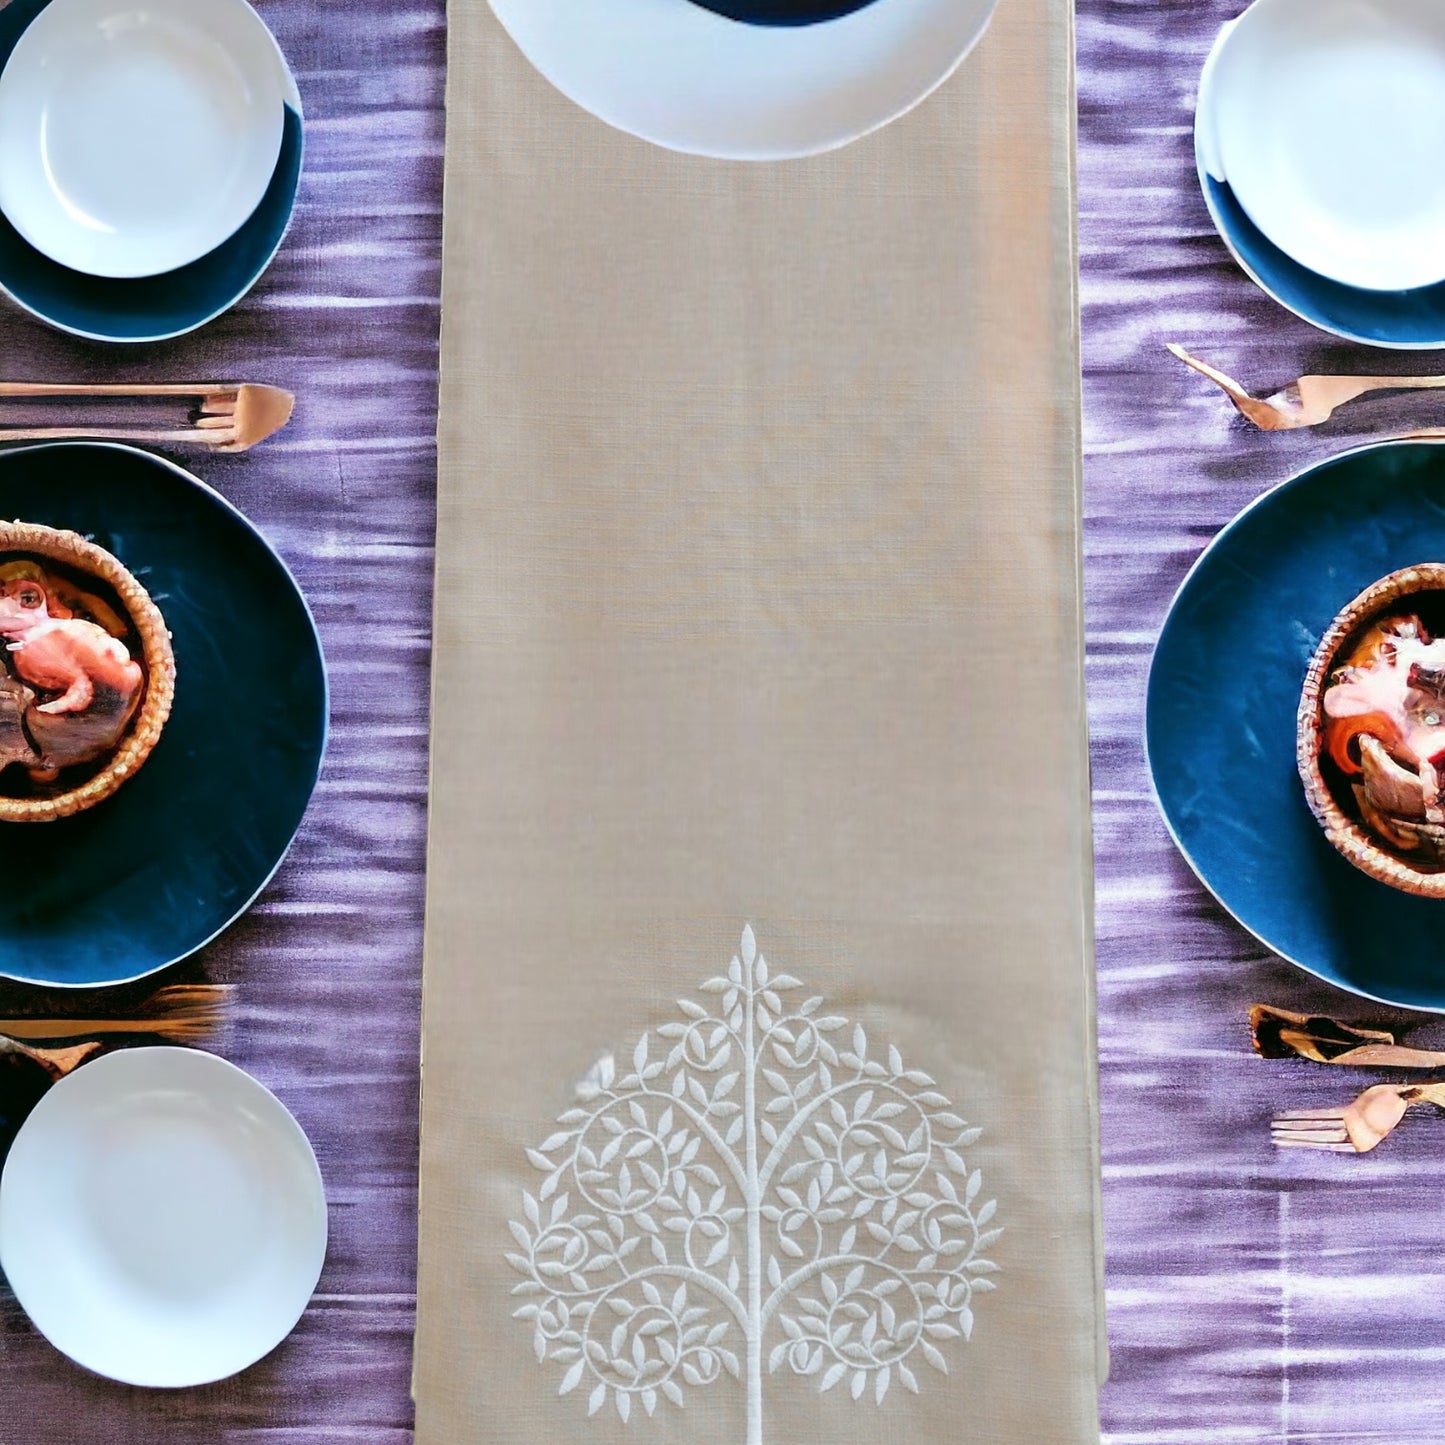 Formal table runner, placed on a dining table